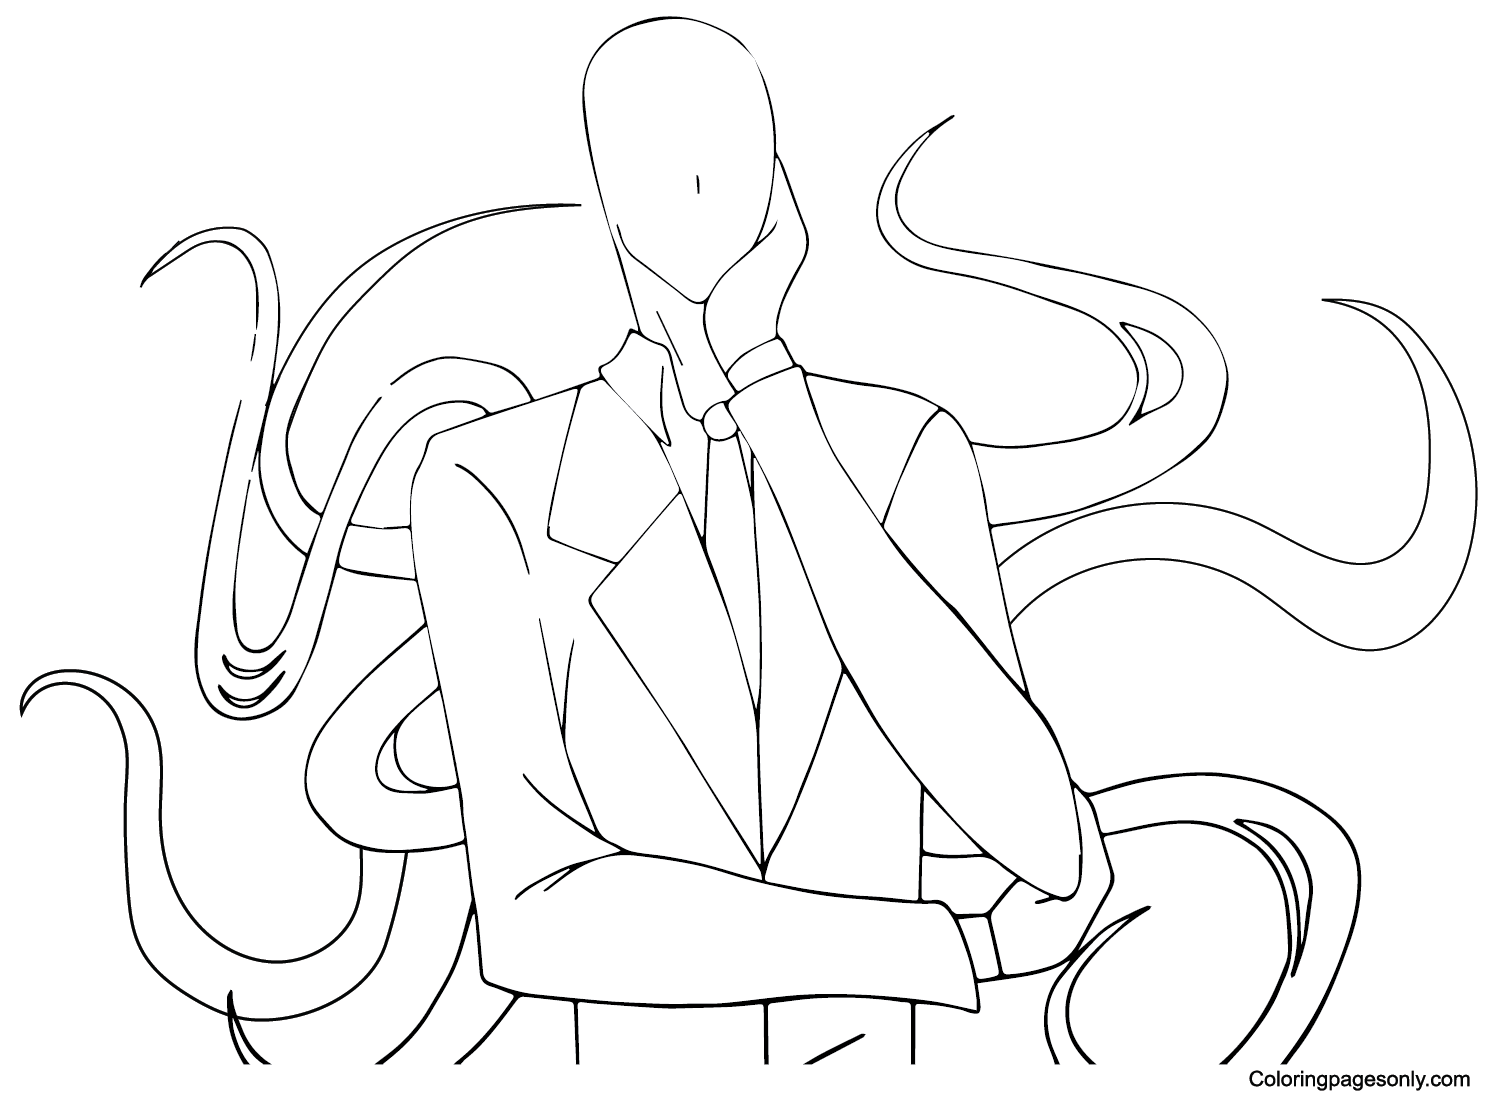 Slender Man Coloring Pages Printable for Free Download